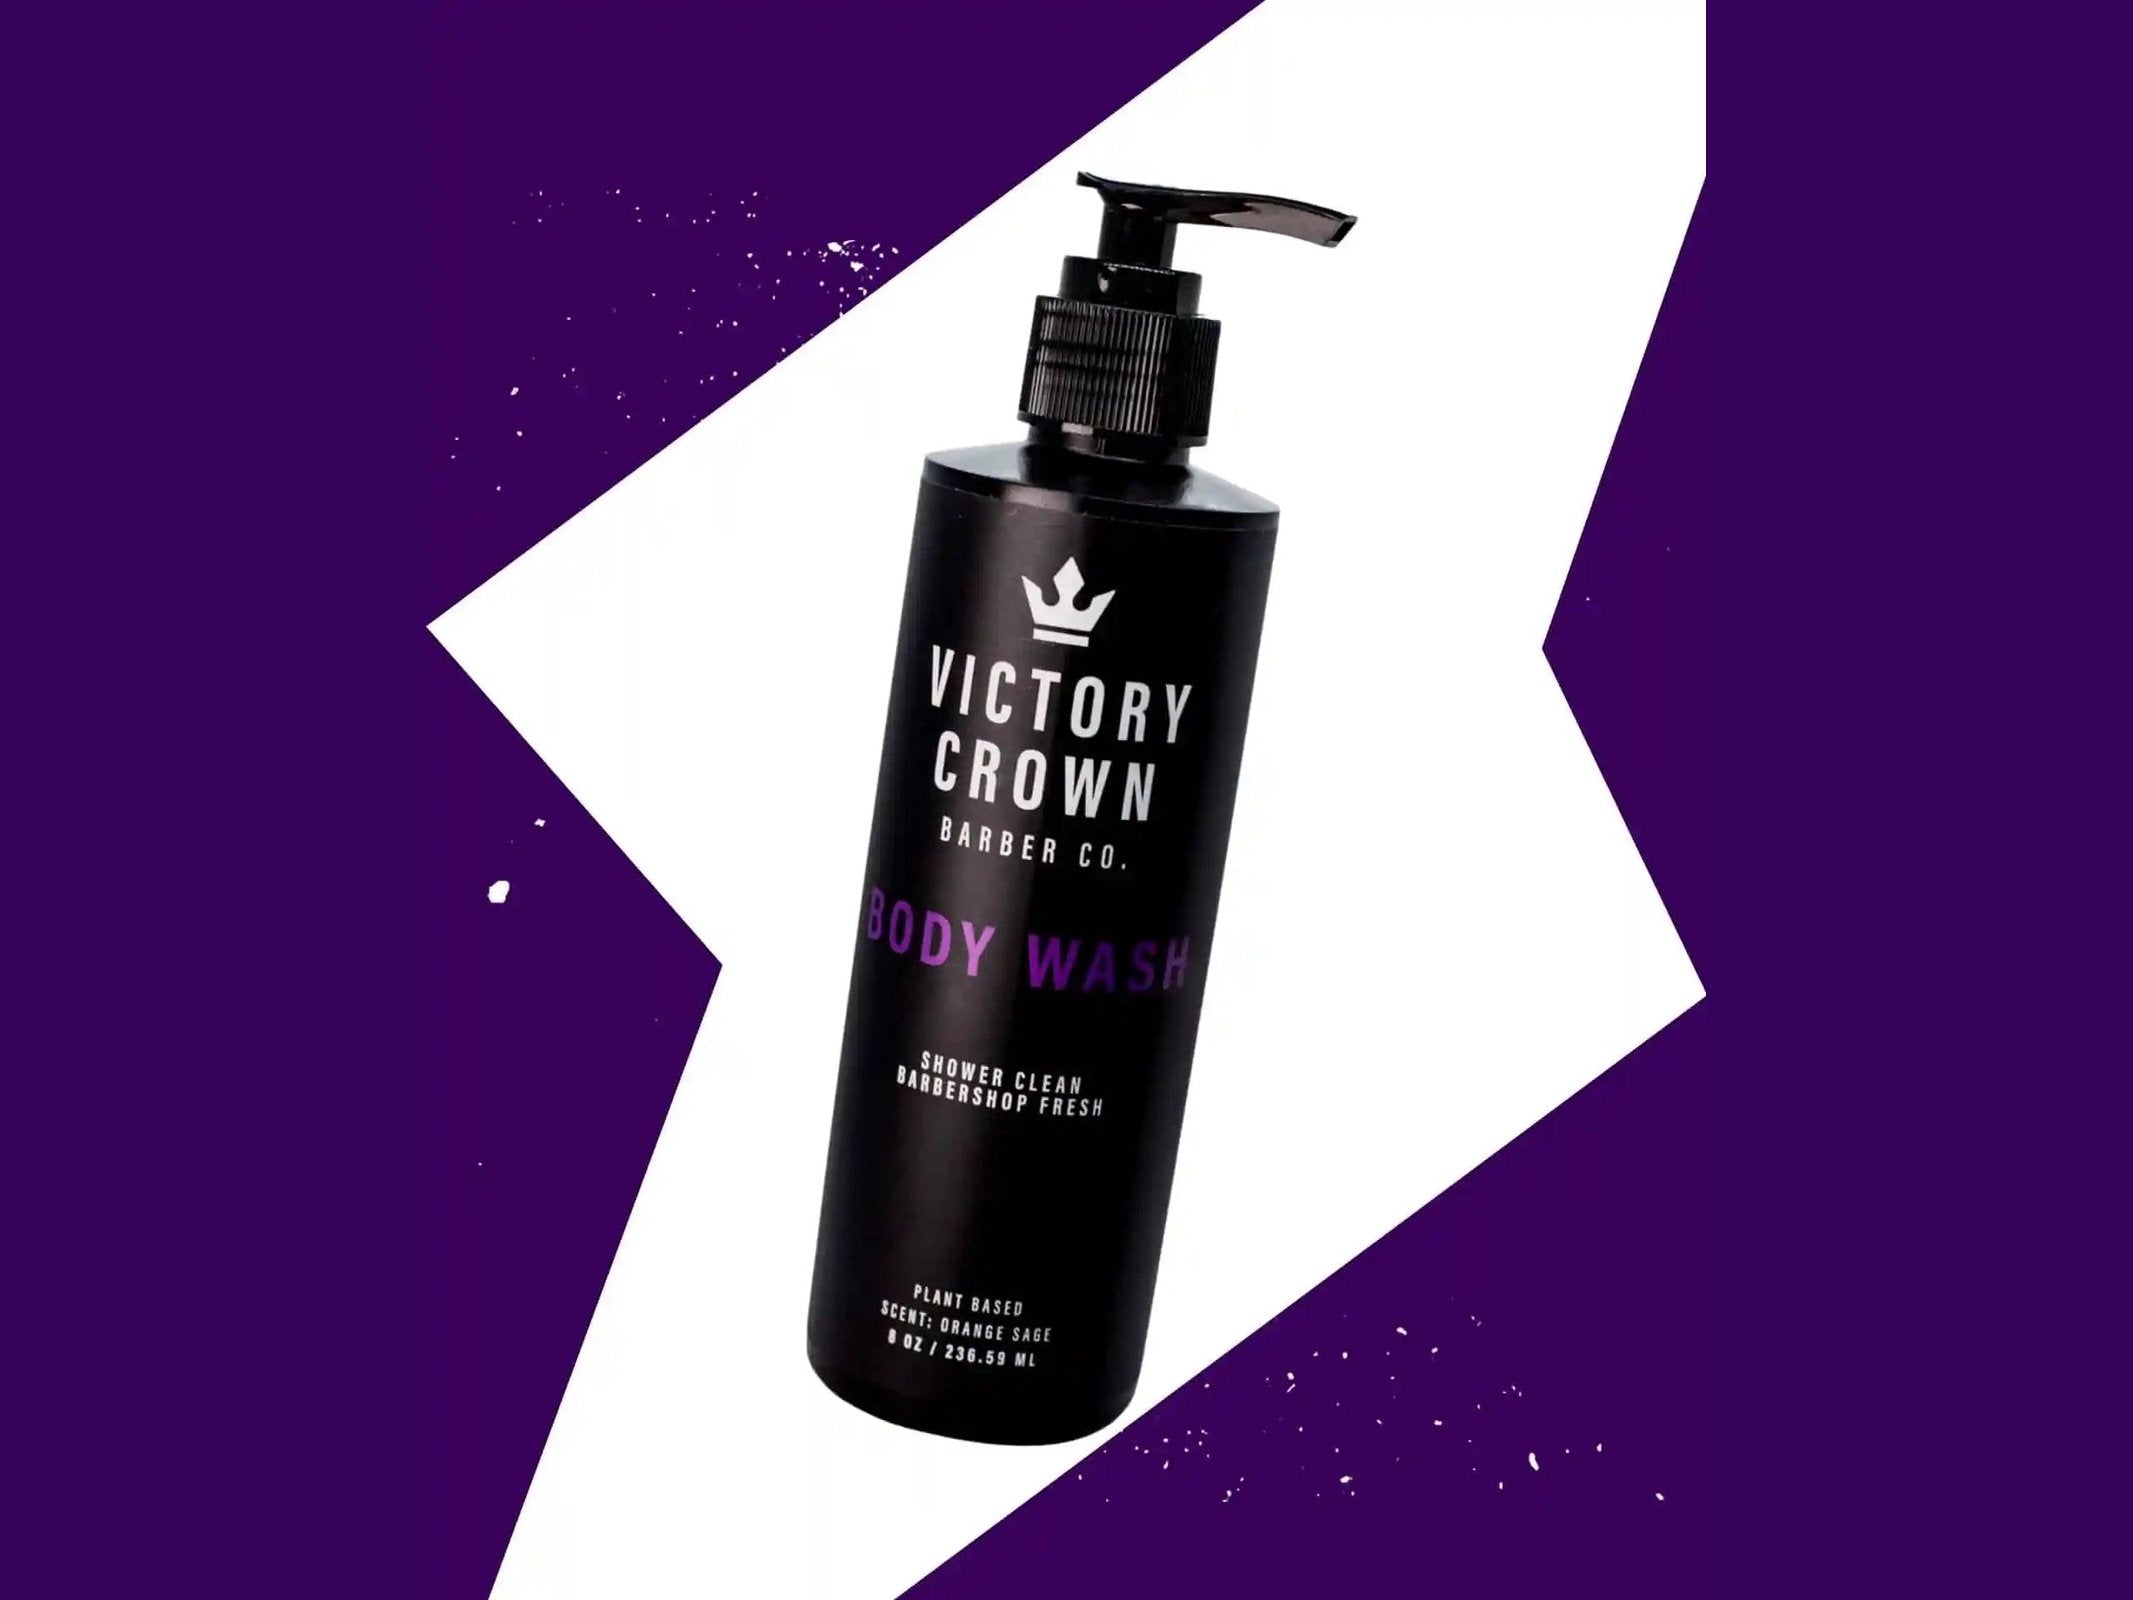 Load image into Gallery viewer, Victory Crown Body Wash, 8 oz.
